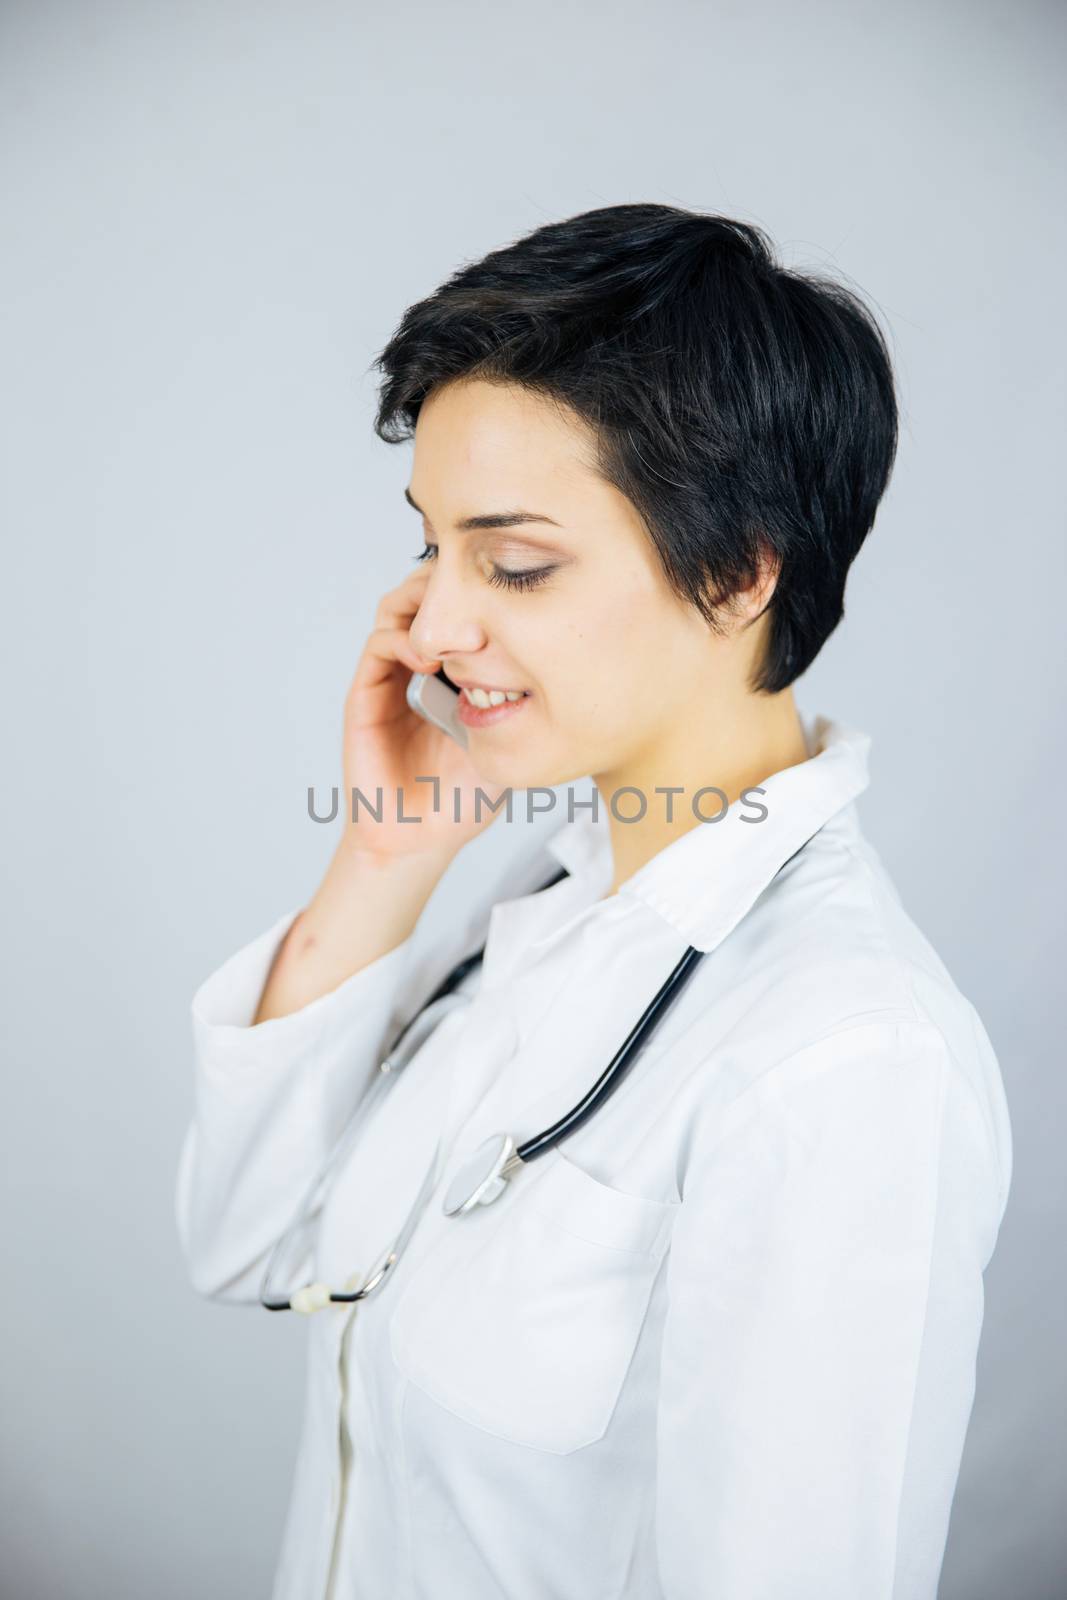 Female doctor talking on the cell phone isolated on white background.